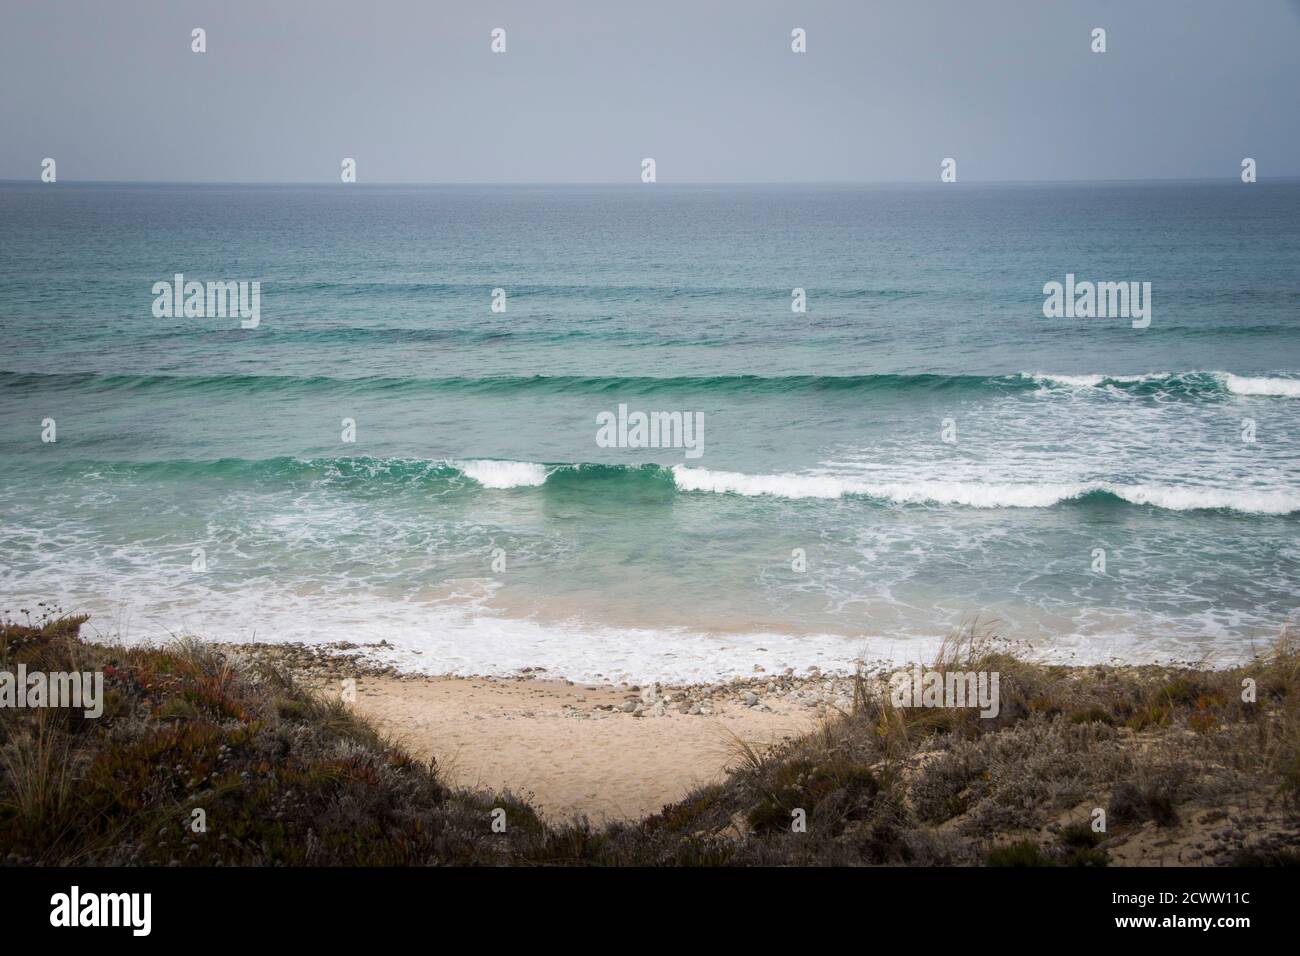 Sea landscape of waves coming ashore on the beach, dune landscape on foggy day Stock Photo